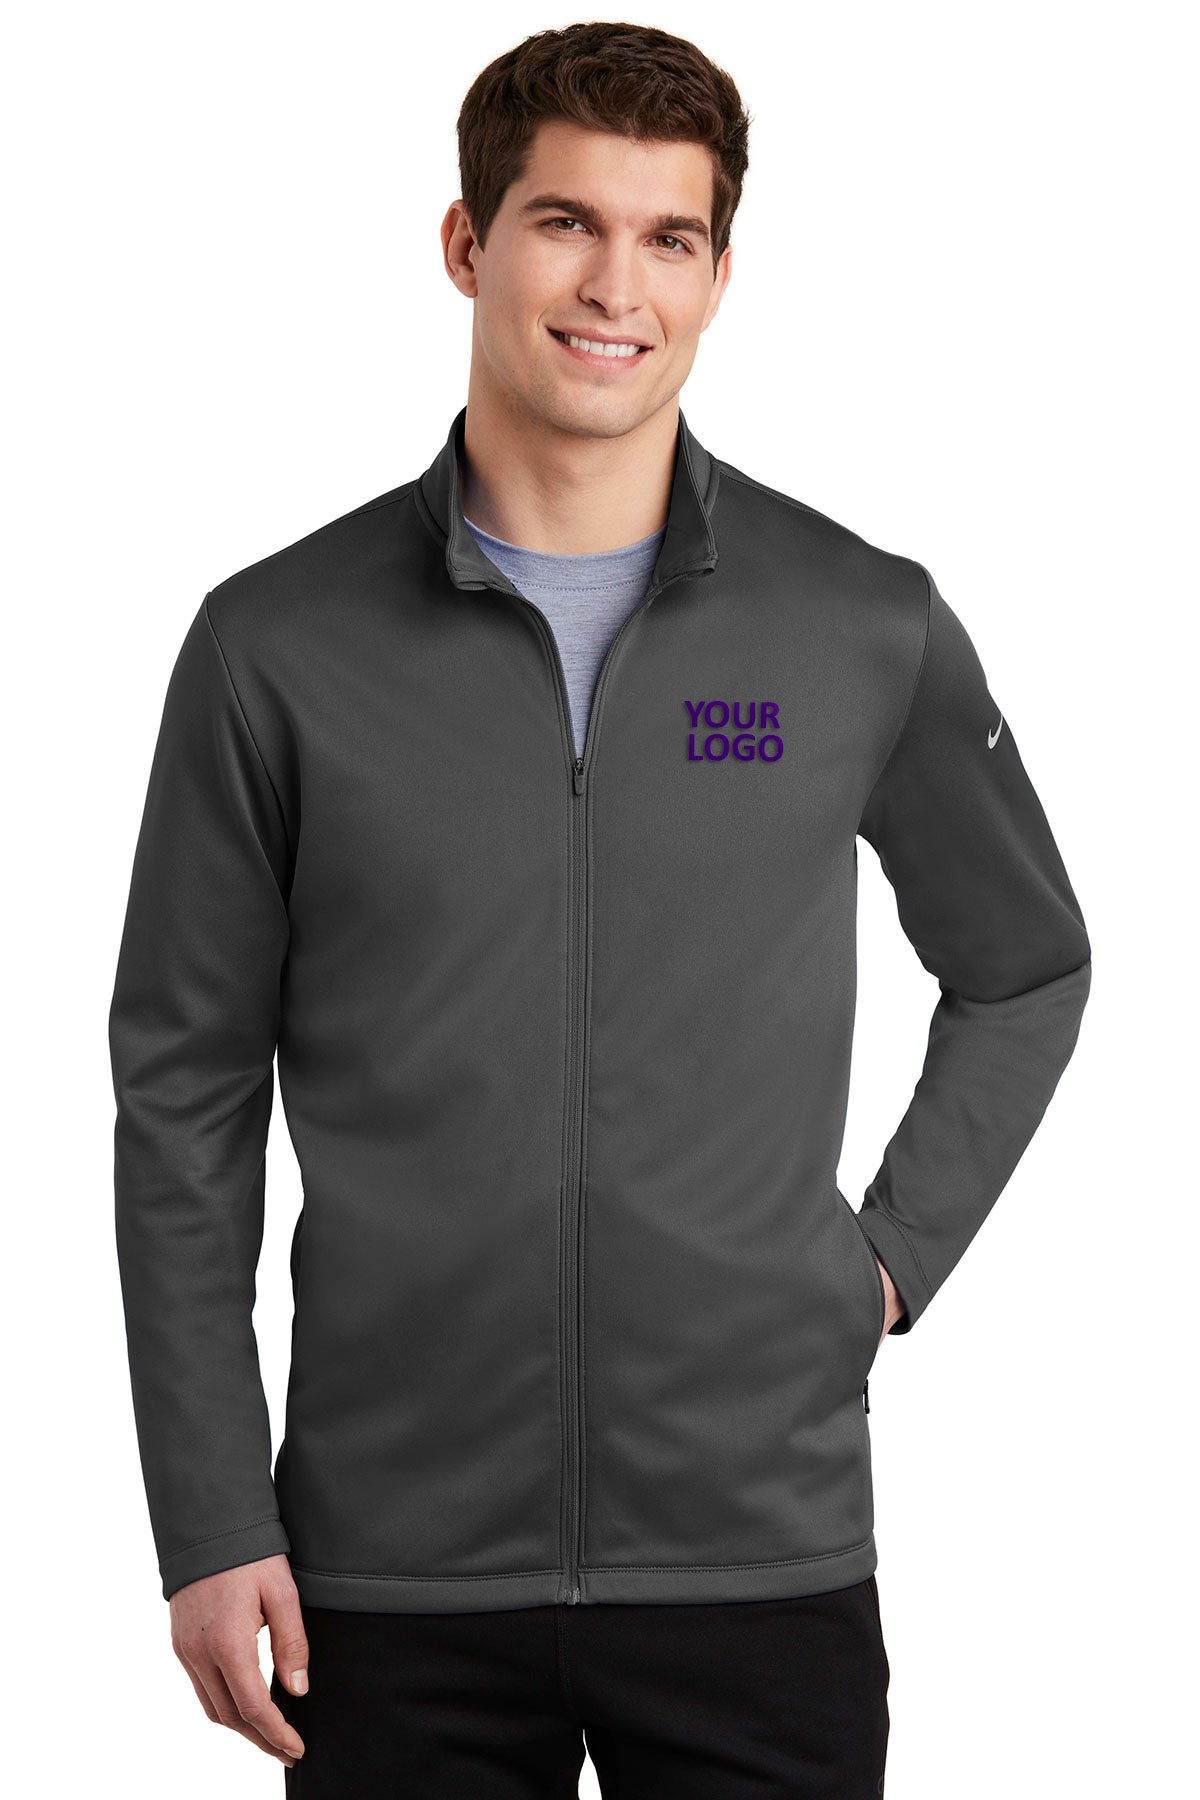 Nike Anthracite NKAH6418 embroidered jackets for business